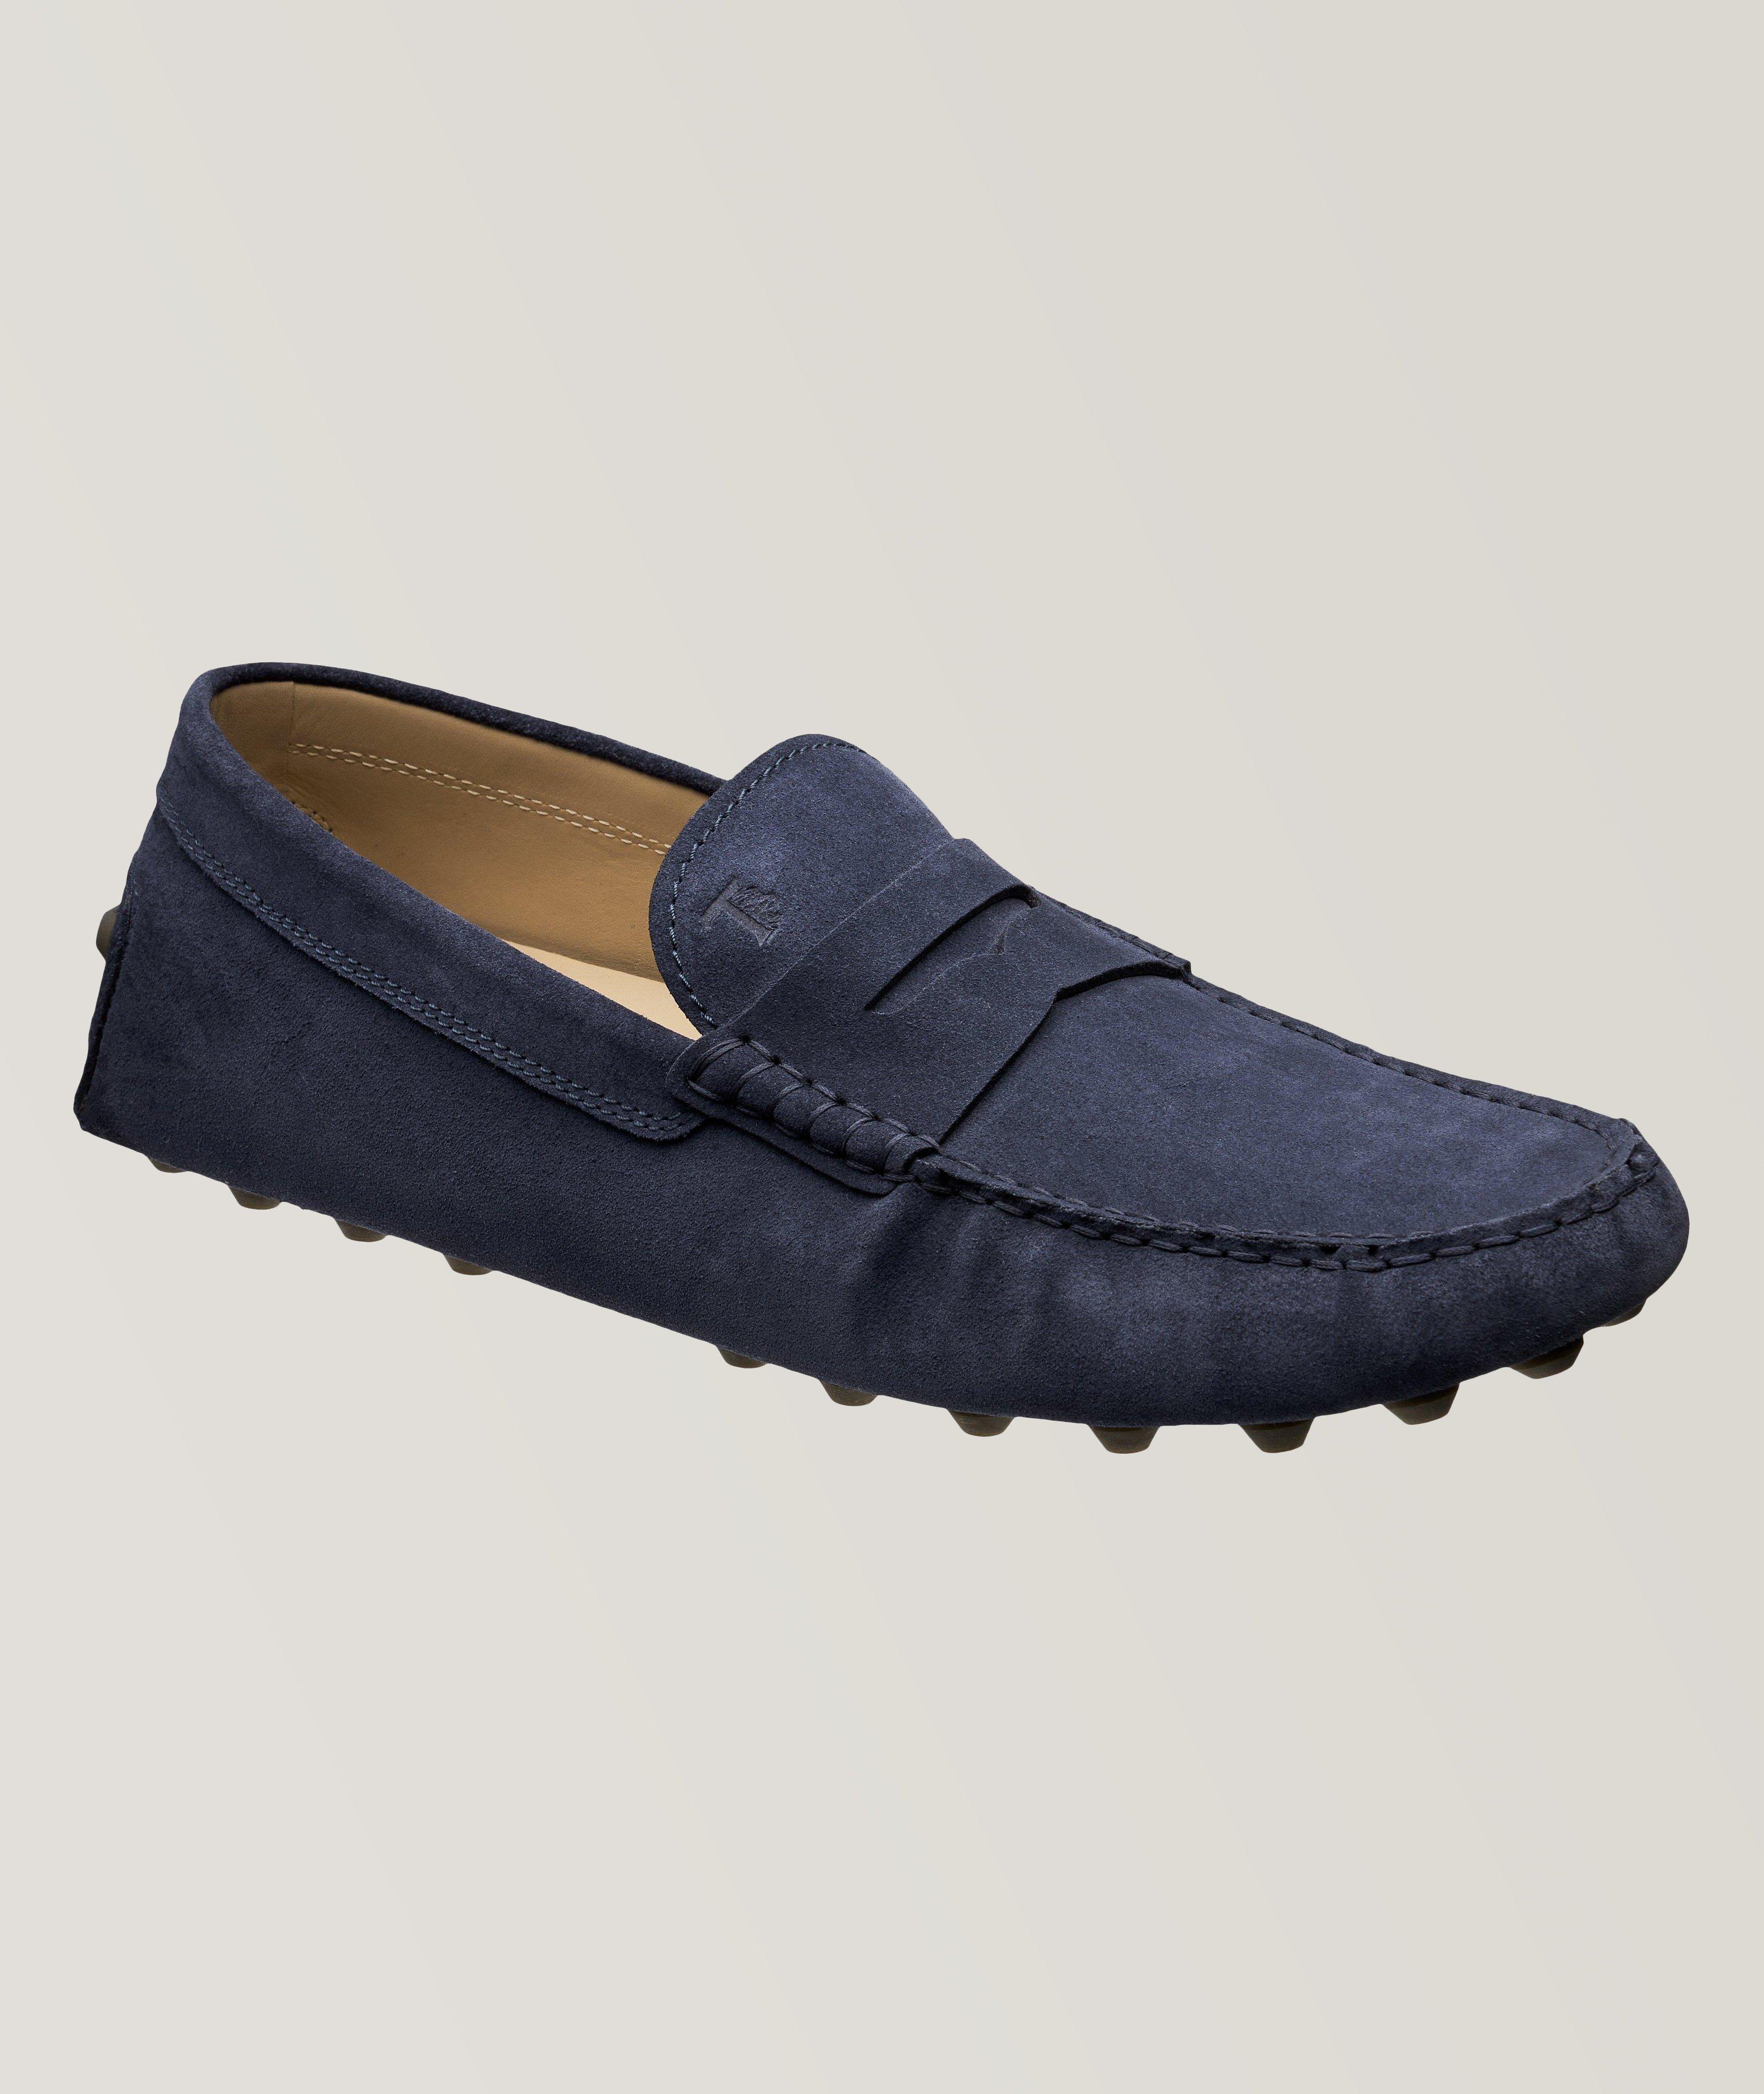 Gommino Suede Driver Shoes image 0